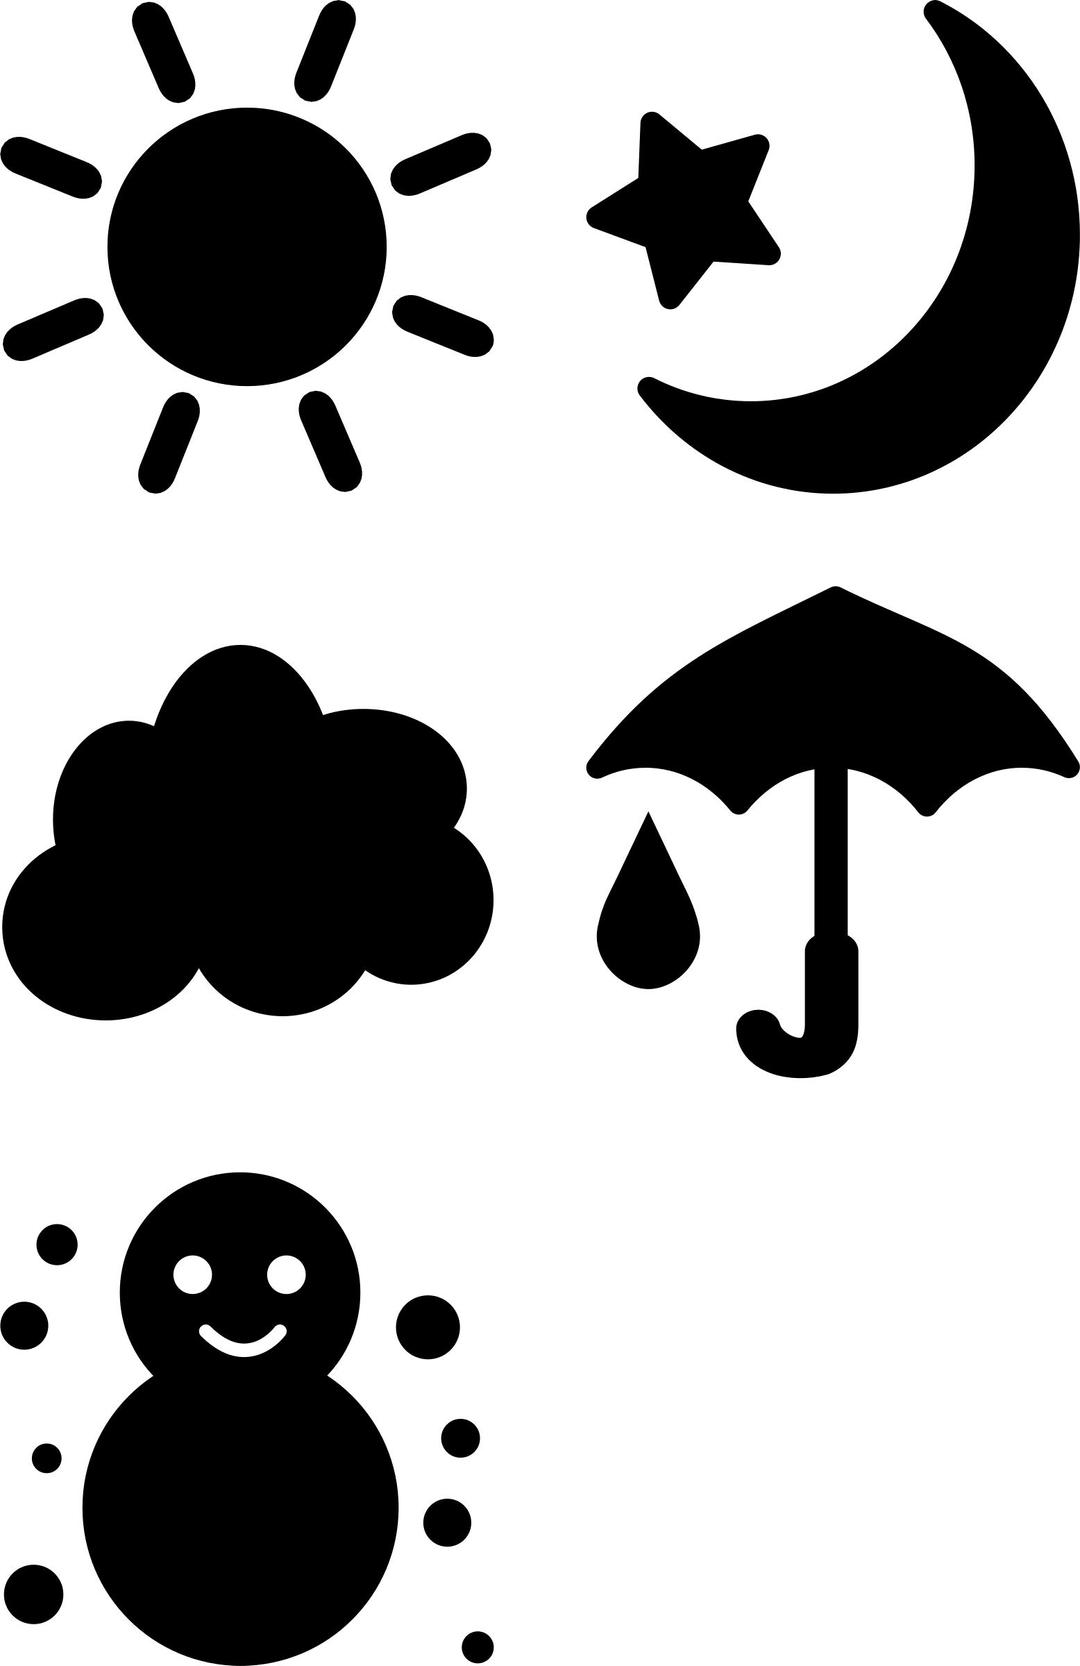 5 Types of Weather Pictograms png transparent